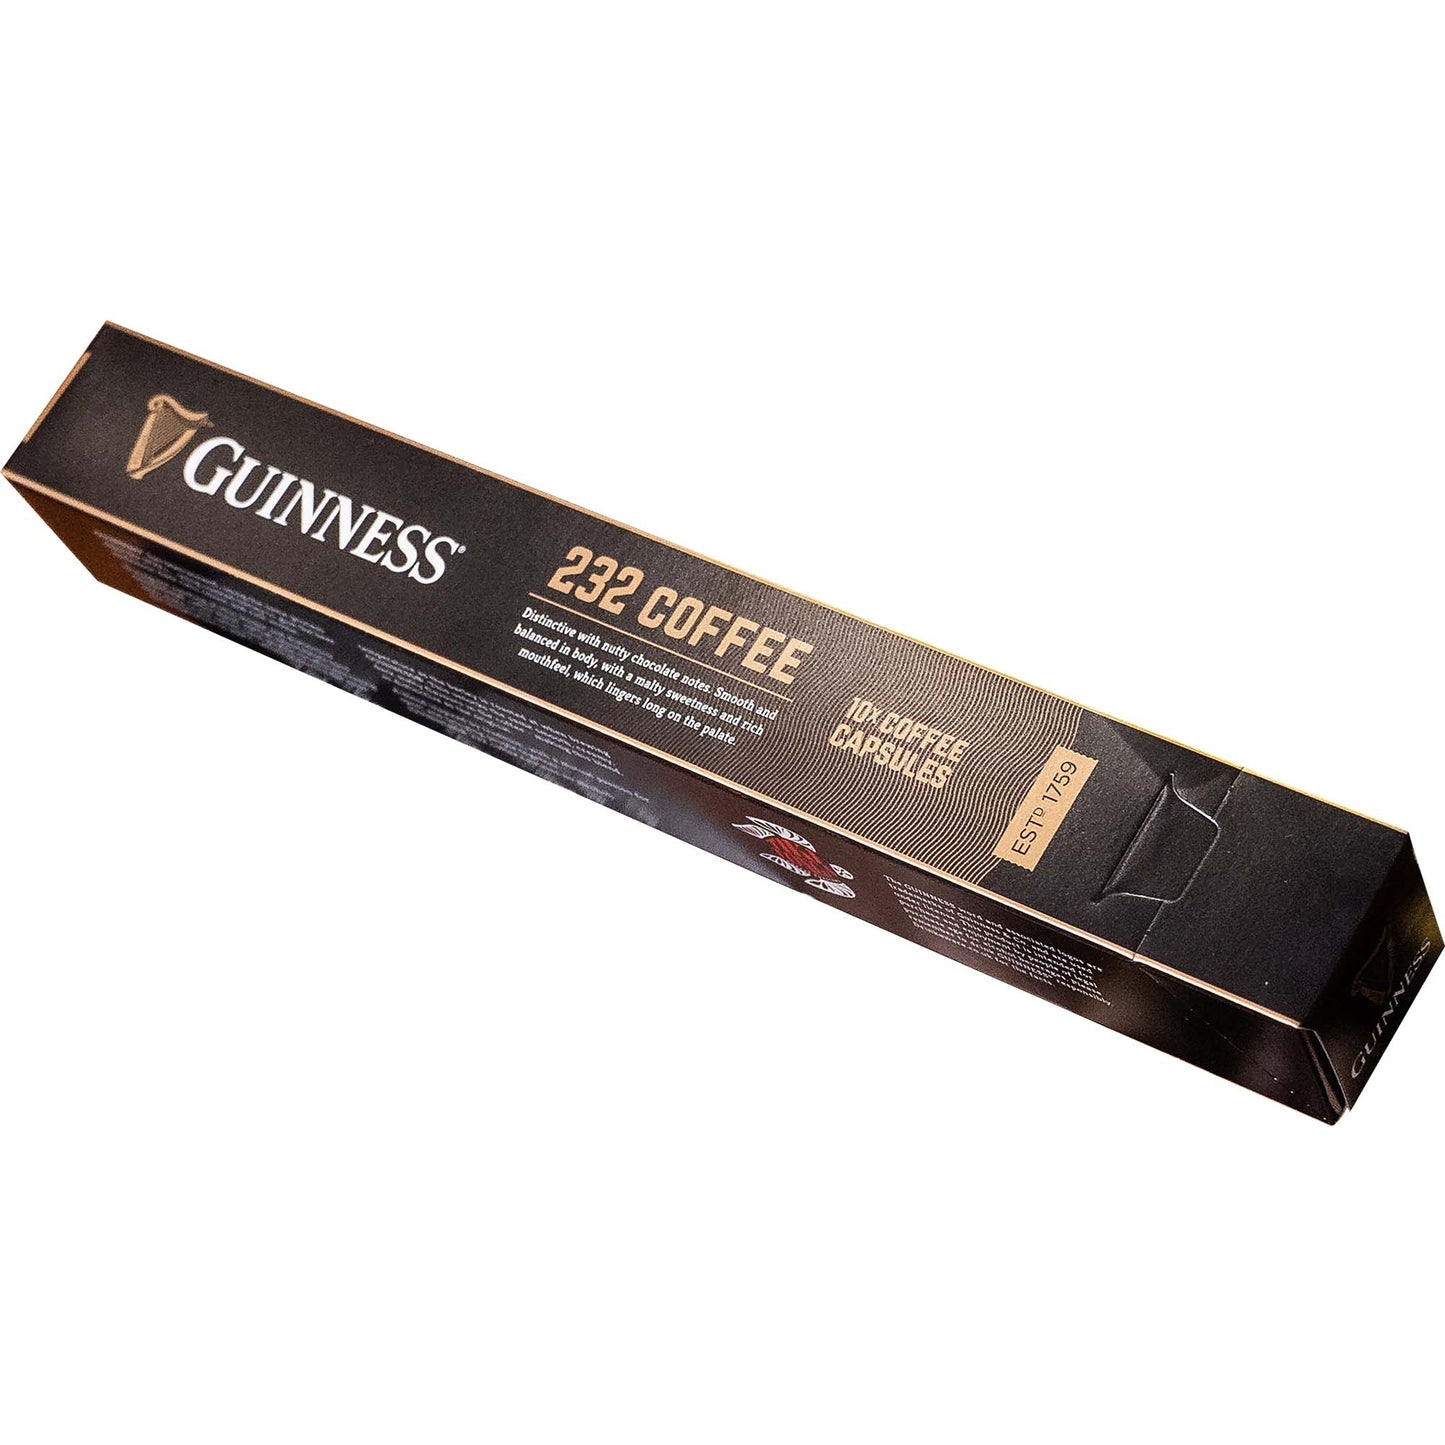 Guinness UK's Guinness 232 Coffee Capsules, featuring the renowned Guinness flavor, are packaged in a convenient box. The product is showcased beautifully against a clean, white background.